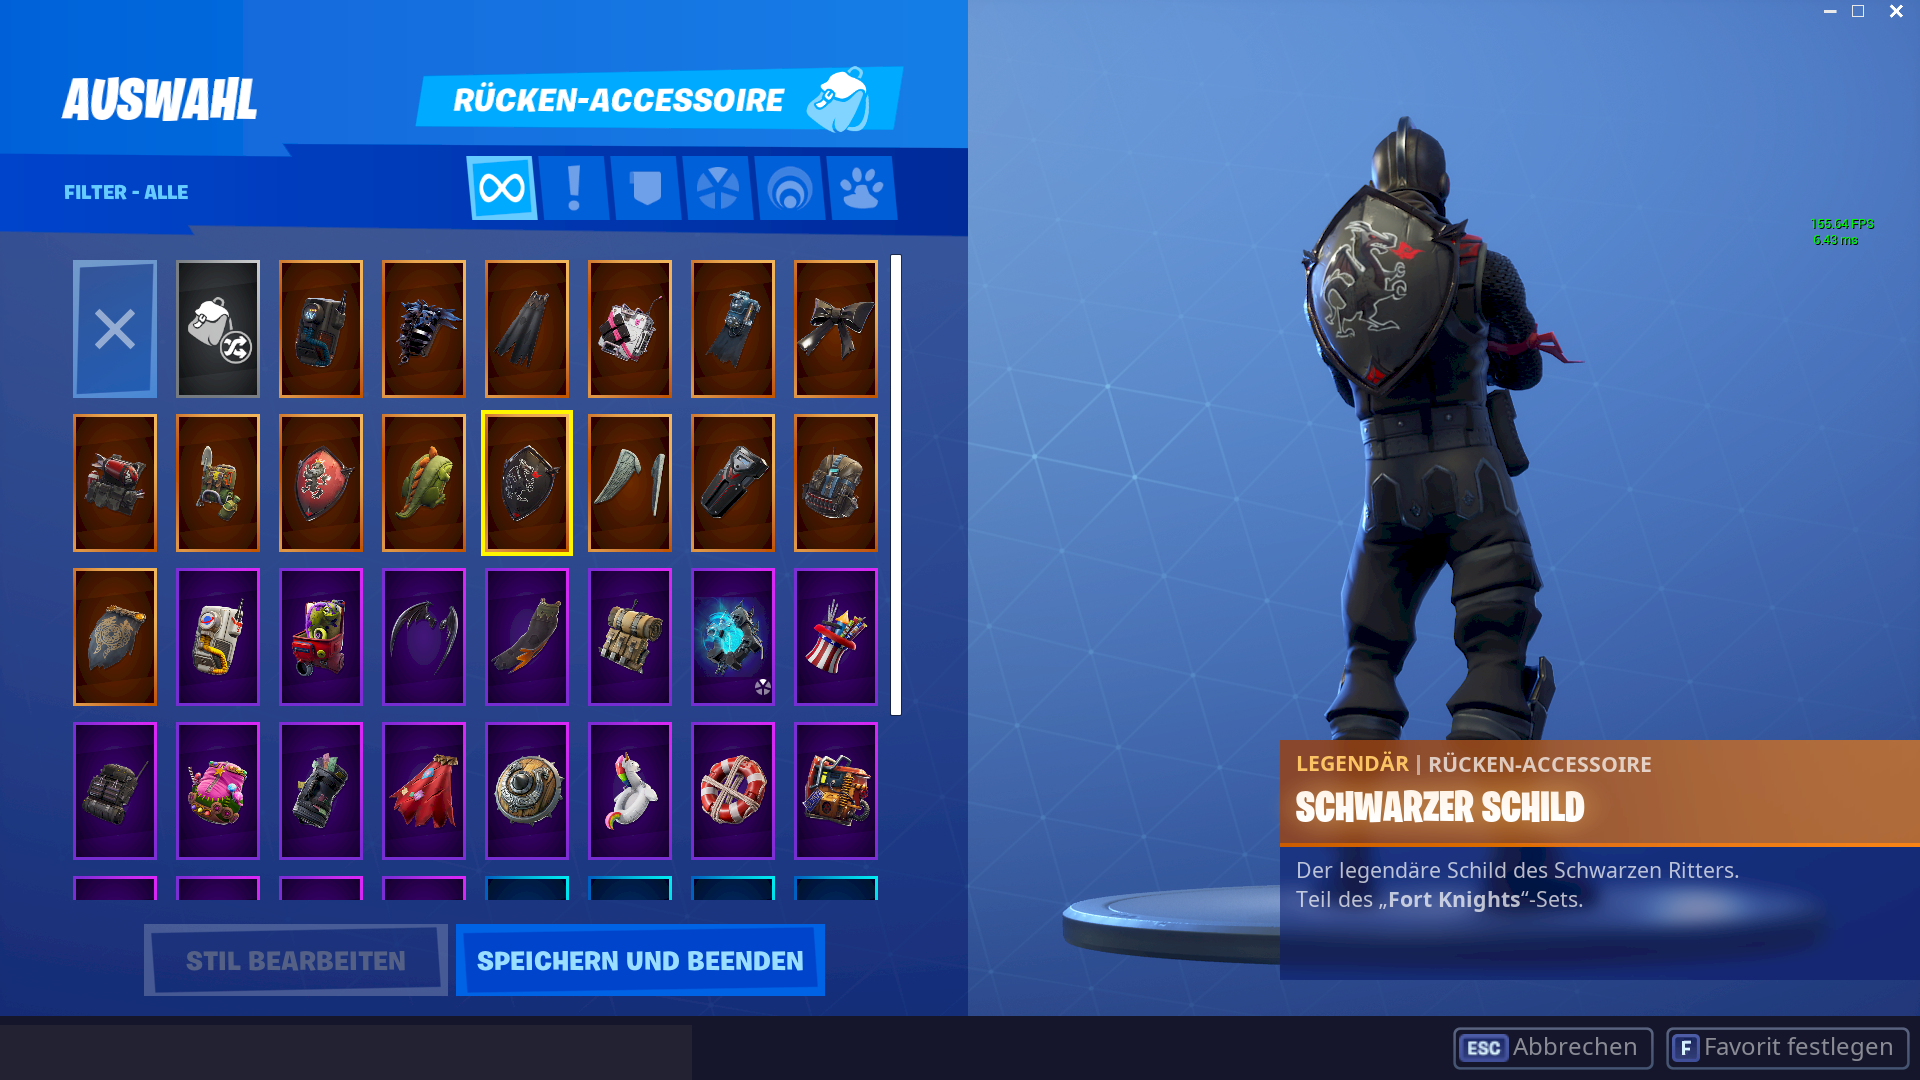 Does my fortnite account worth If yes, how much please in Euro - 2